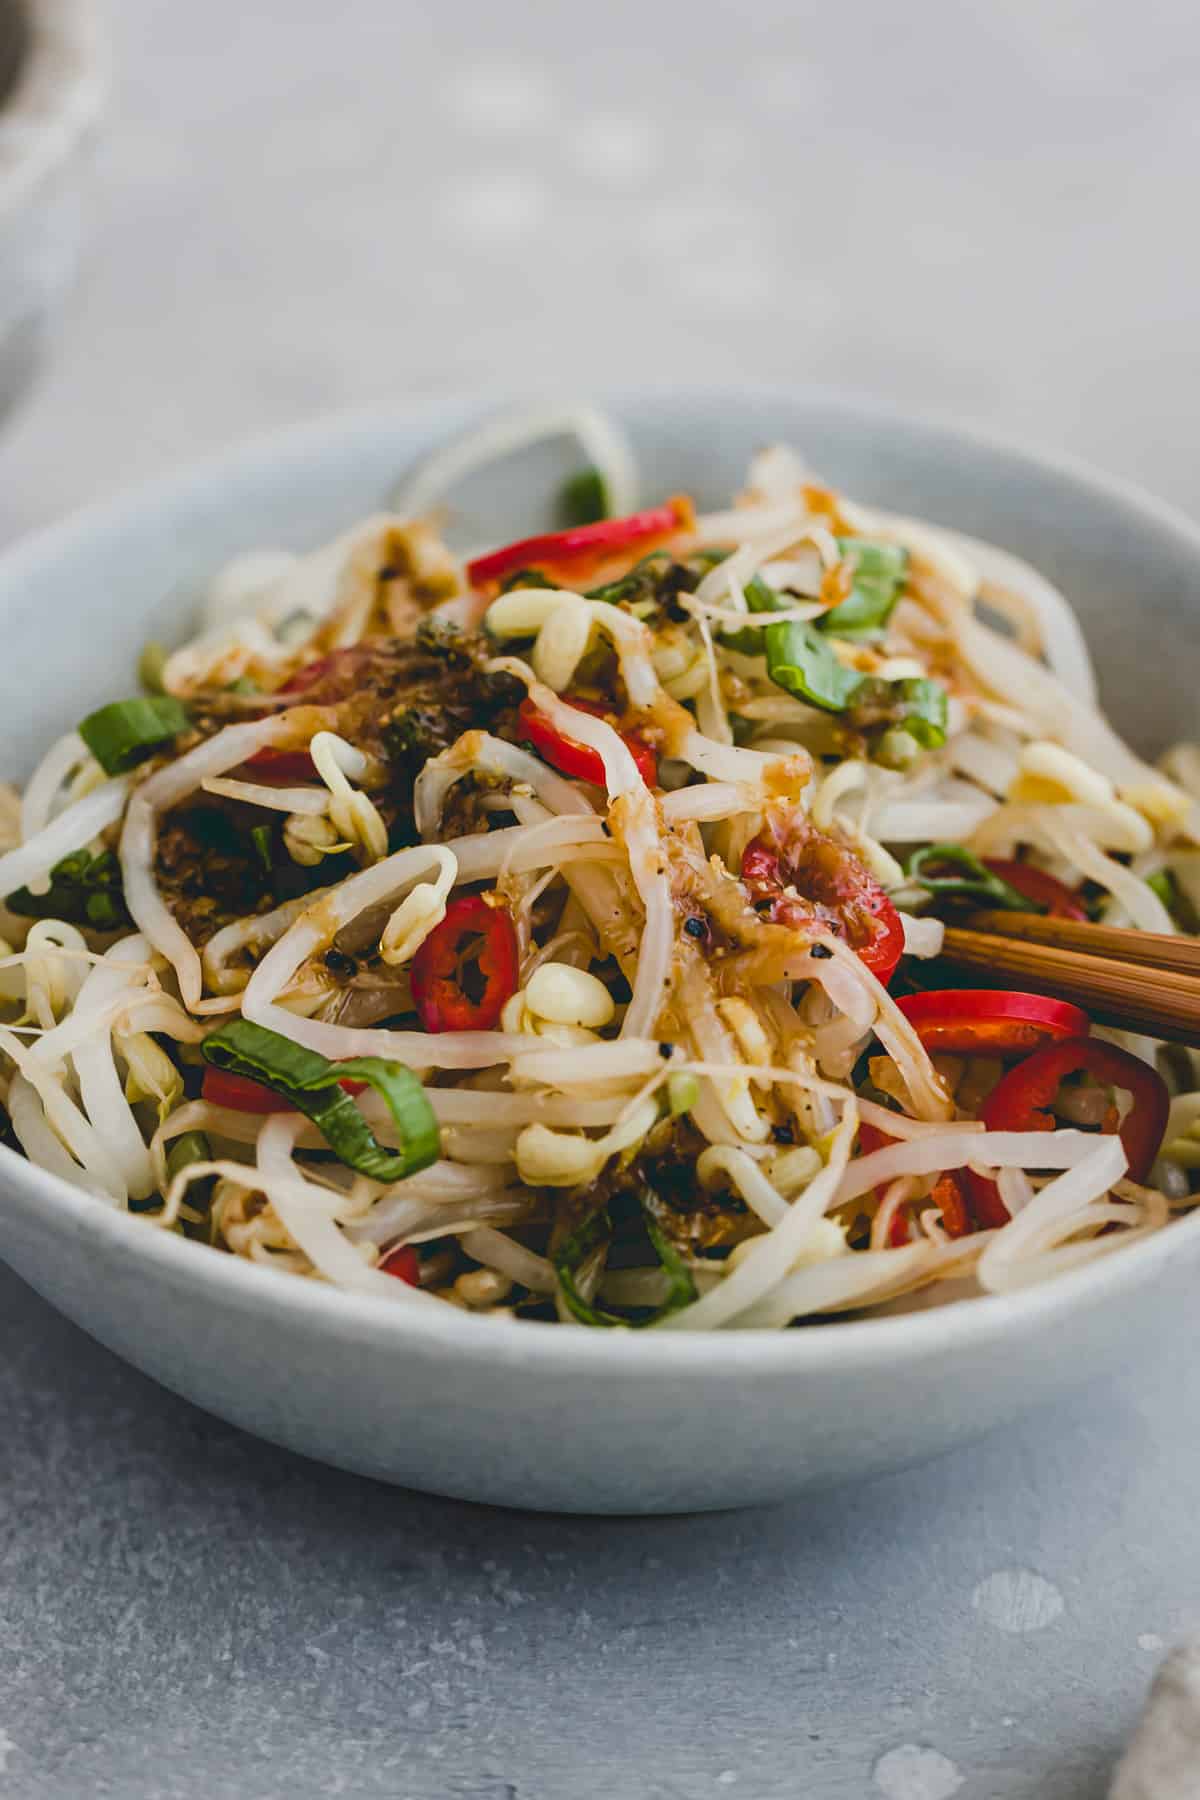 mung bean sprout salad with asian dressing, chili, and scallion in a small bowl